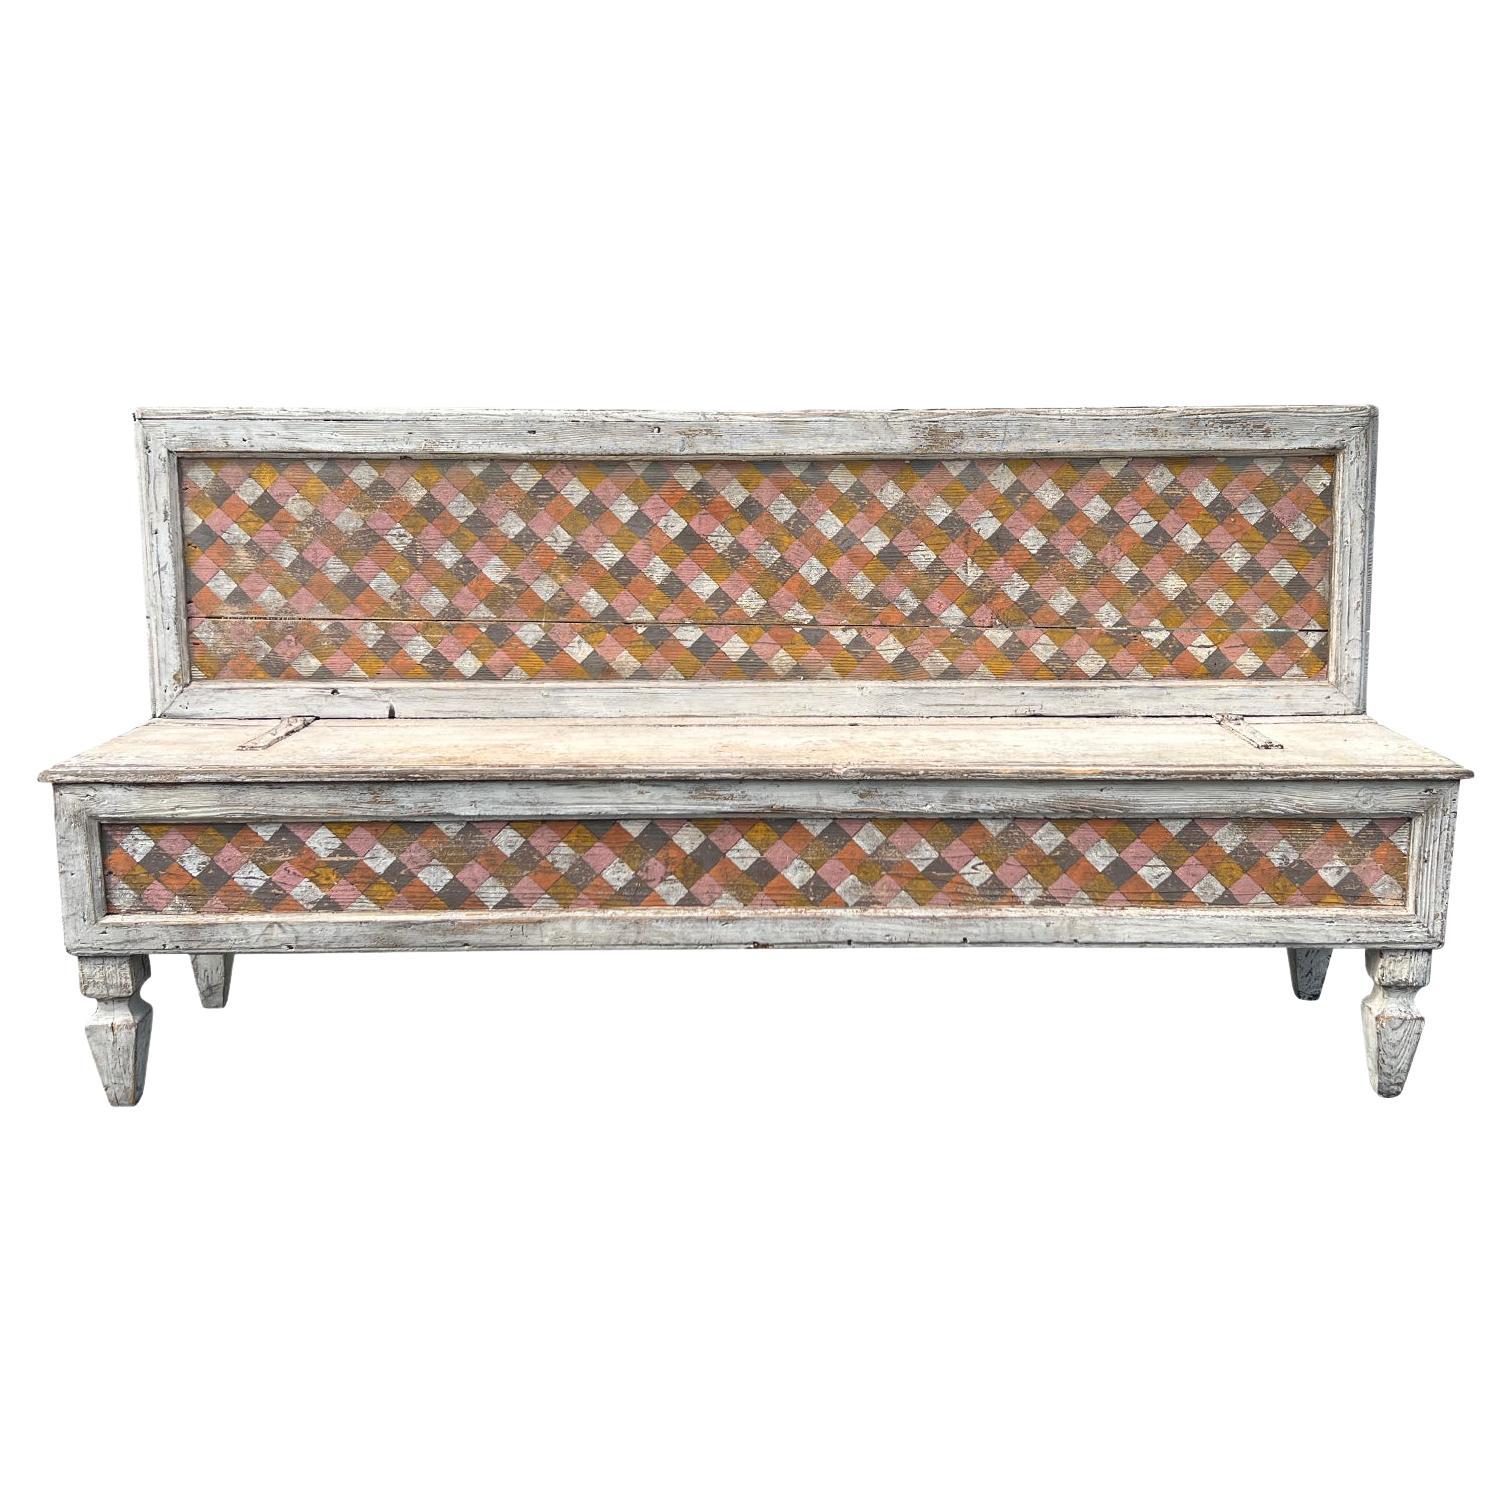 18th Century Italian Arte Povera Pinewood Bench, Antique Seating Furniture For Sale